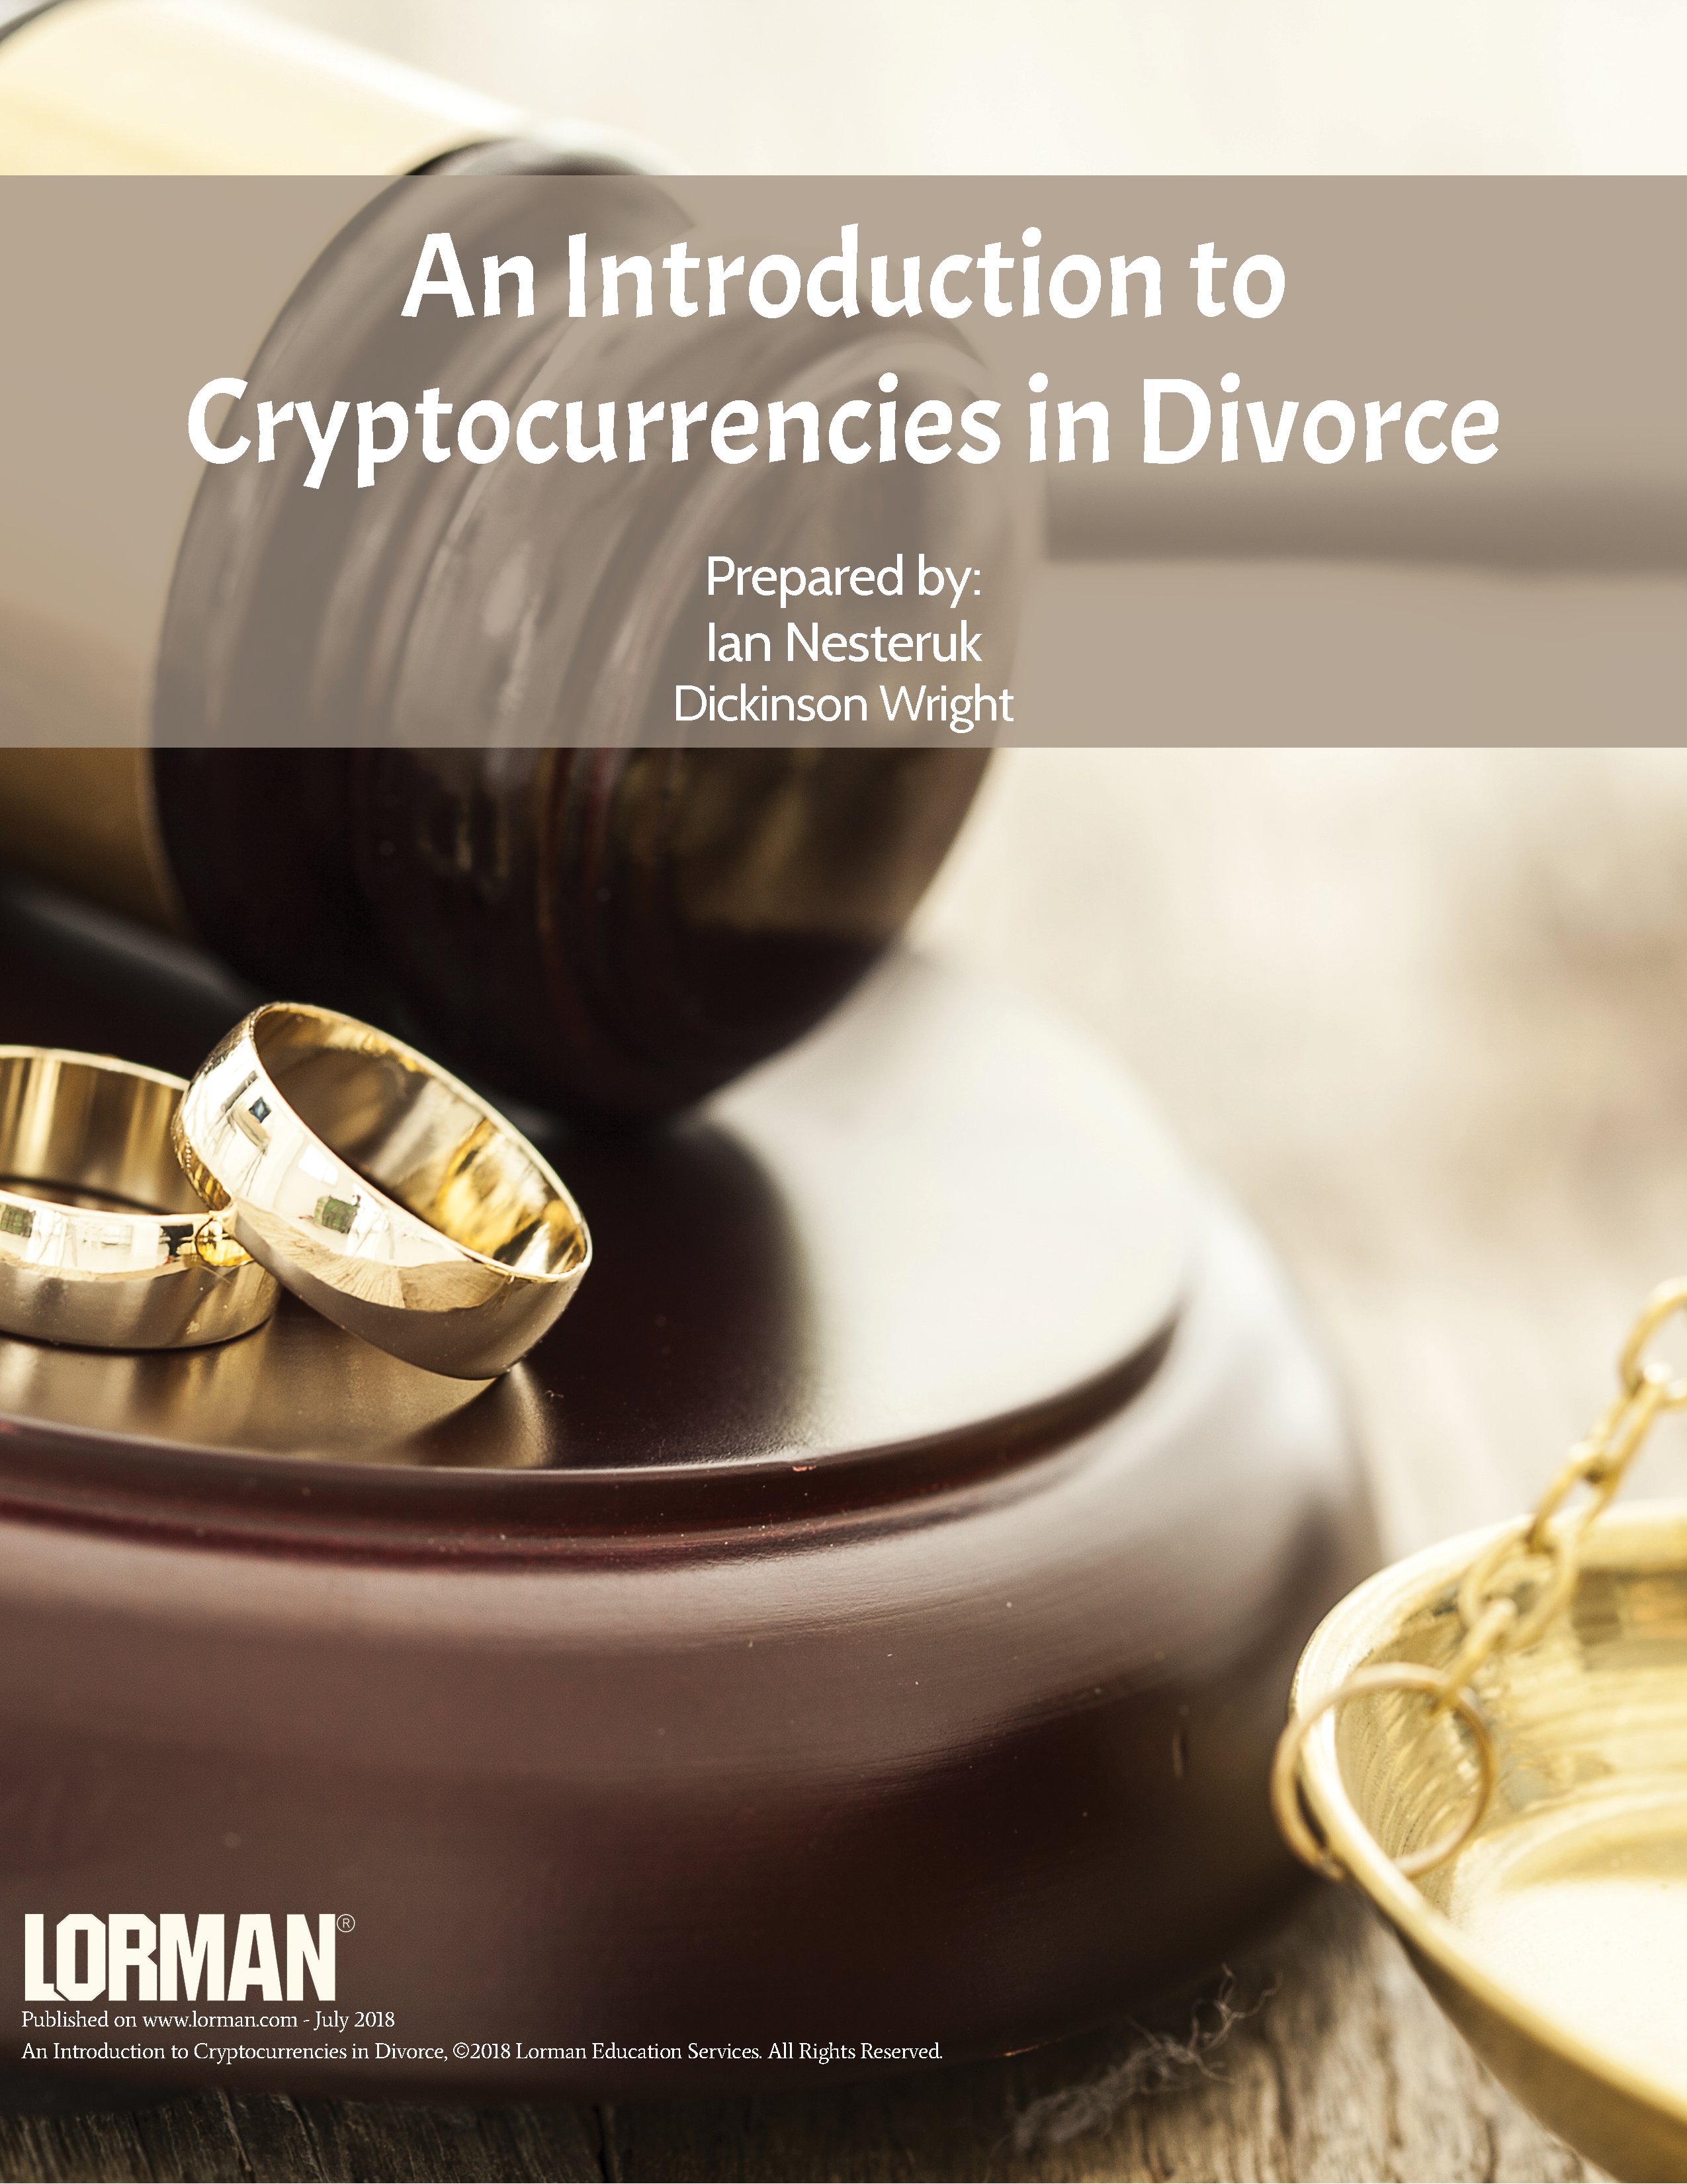 An Introduction to Cryptocurrencies in Divorce